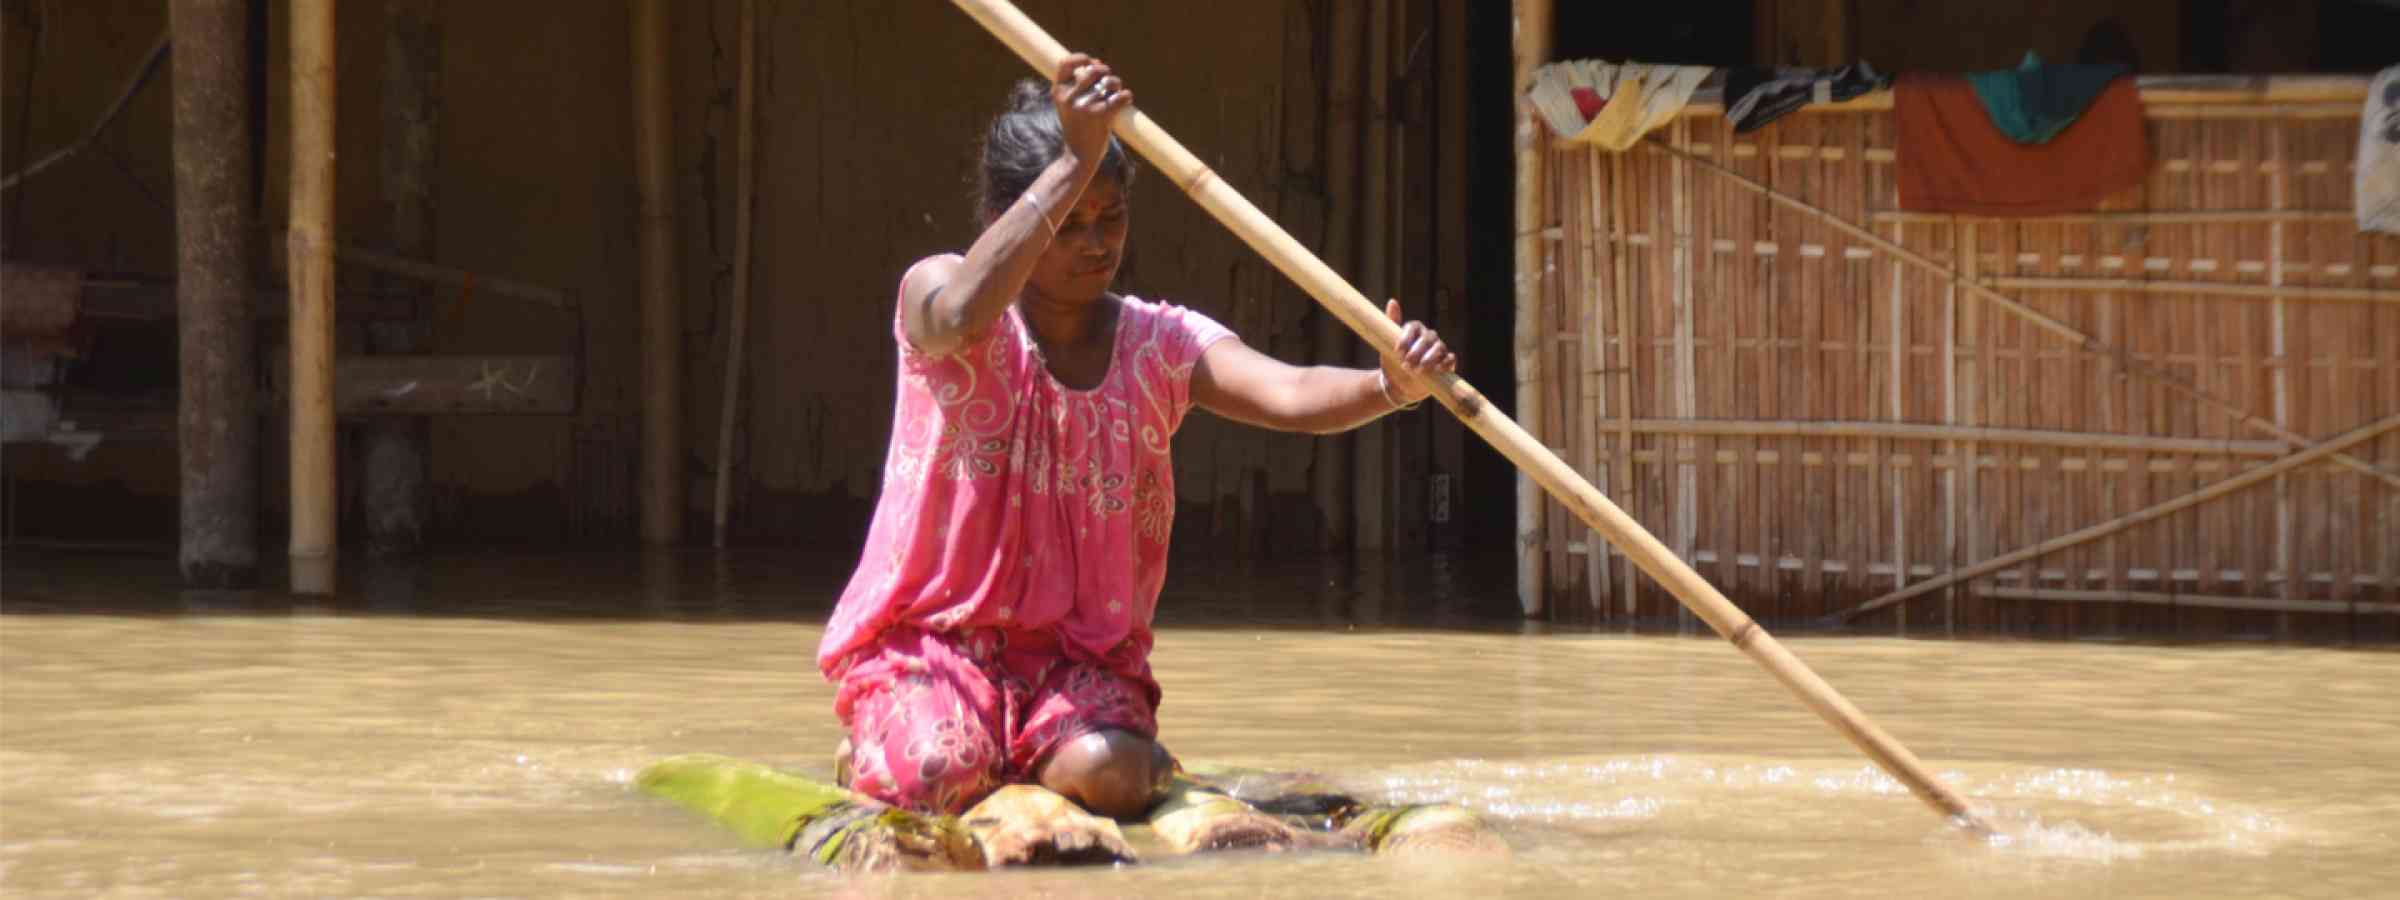 A woman in Assam, India paddles through flooded water using a makeshift raft (2020)